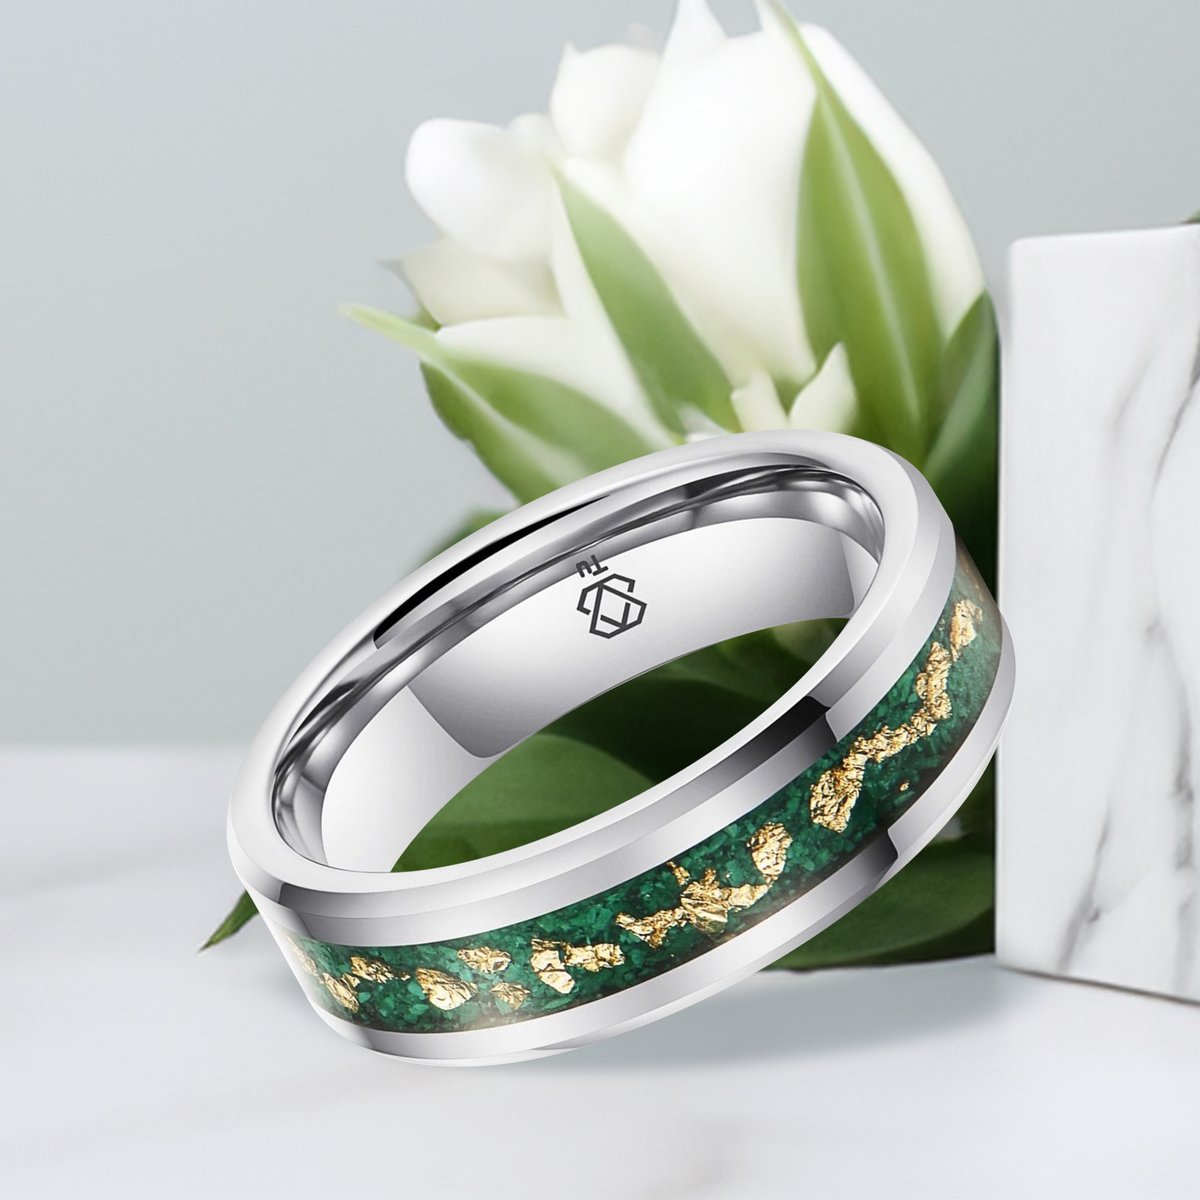 Tungsten Wedding #Ring with Gold Leaf & Green #Malachite Inlay - 6mm - Unisex Buy now - tinyurl.com/4ty7ferp #tungsten #tungstenring #tungstenrings #tungstencarbide